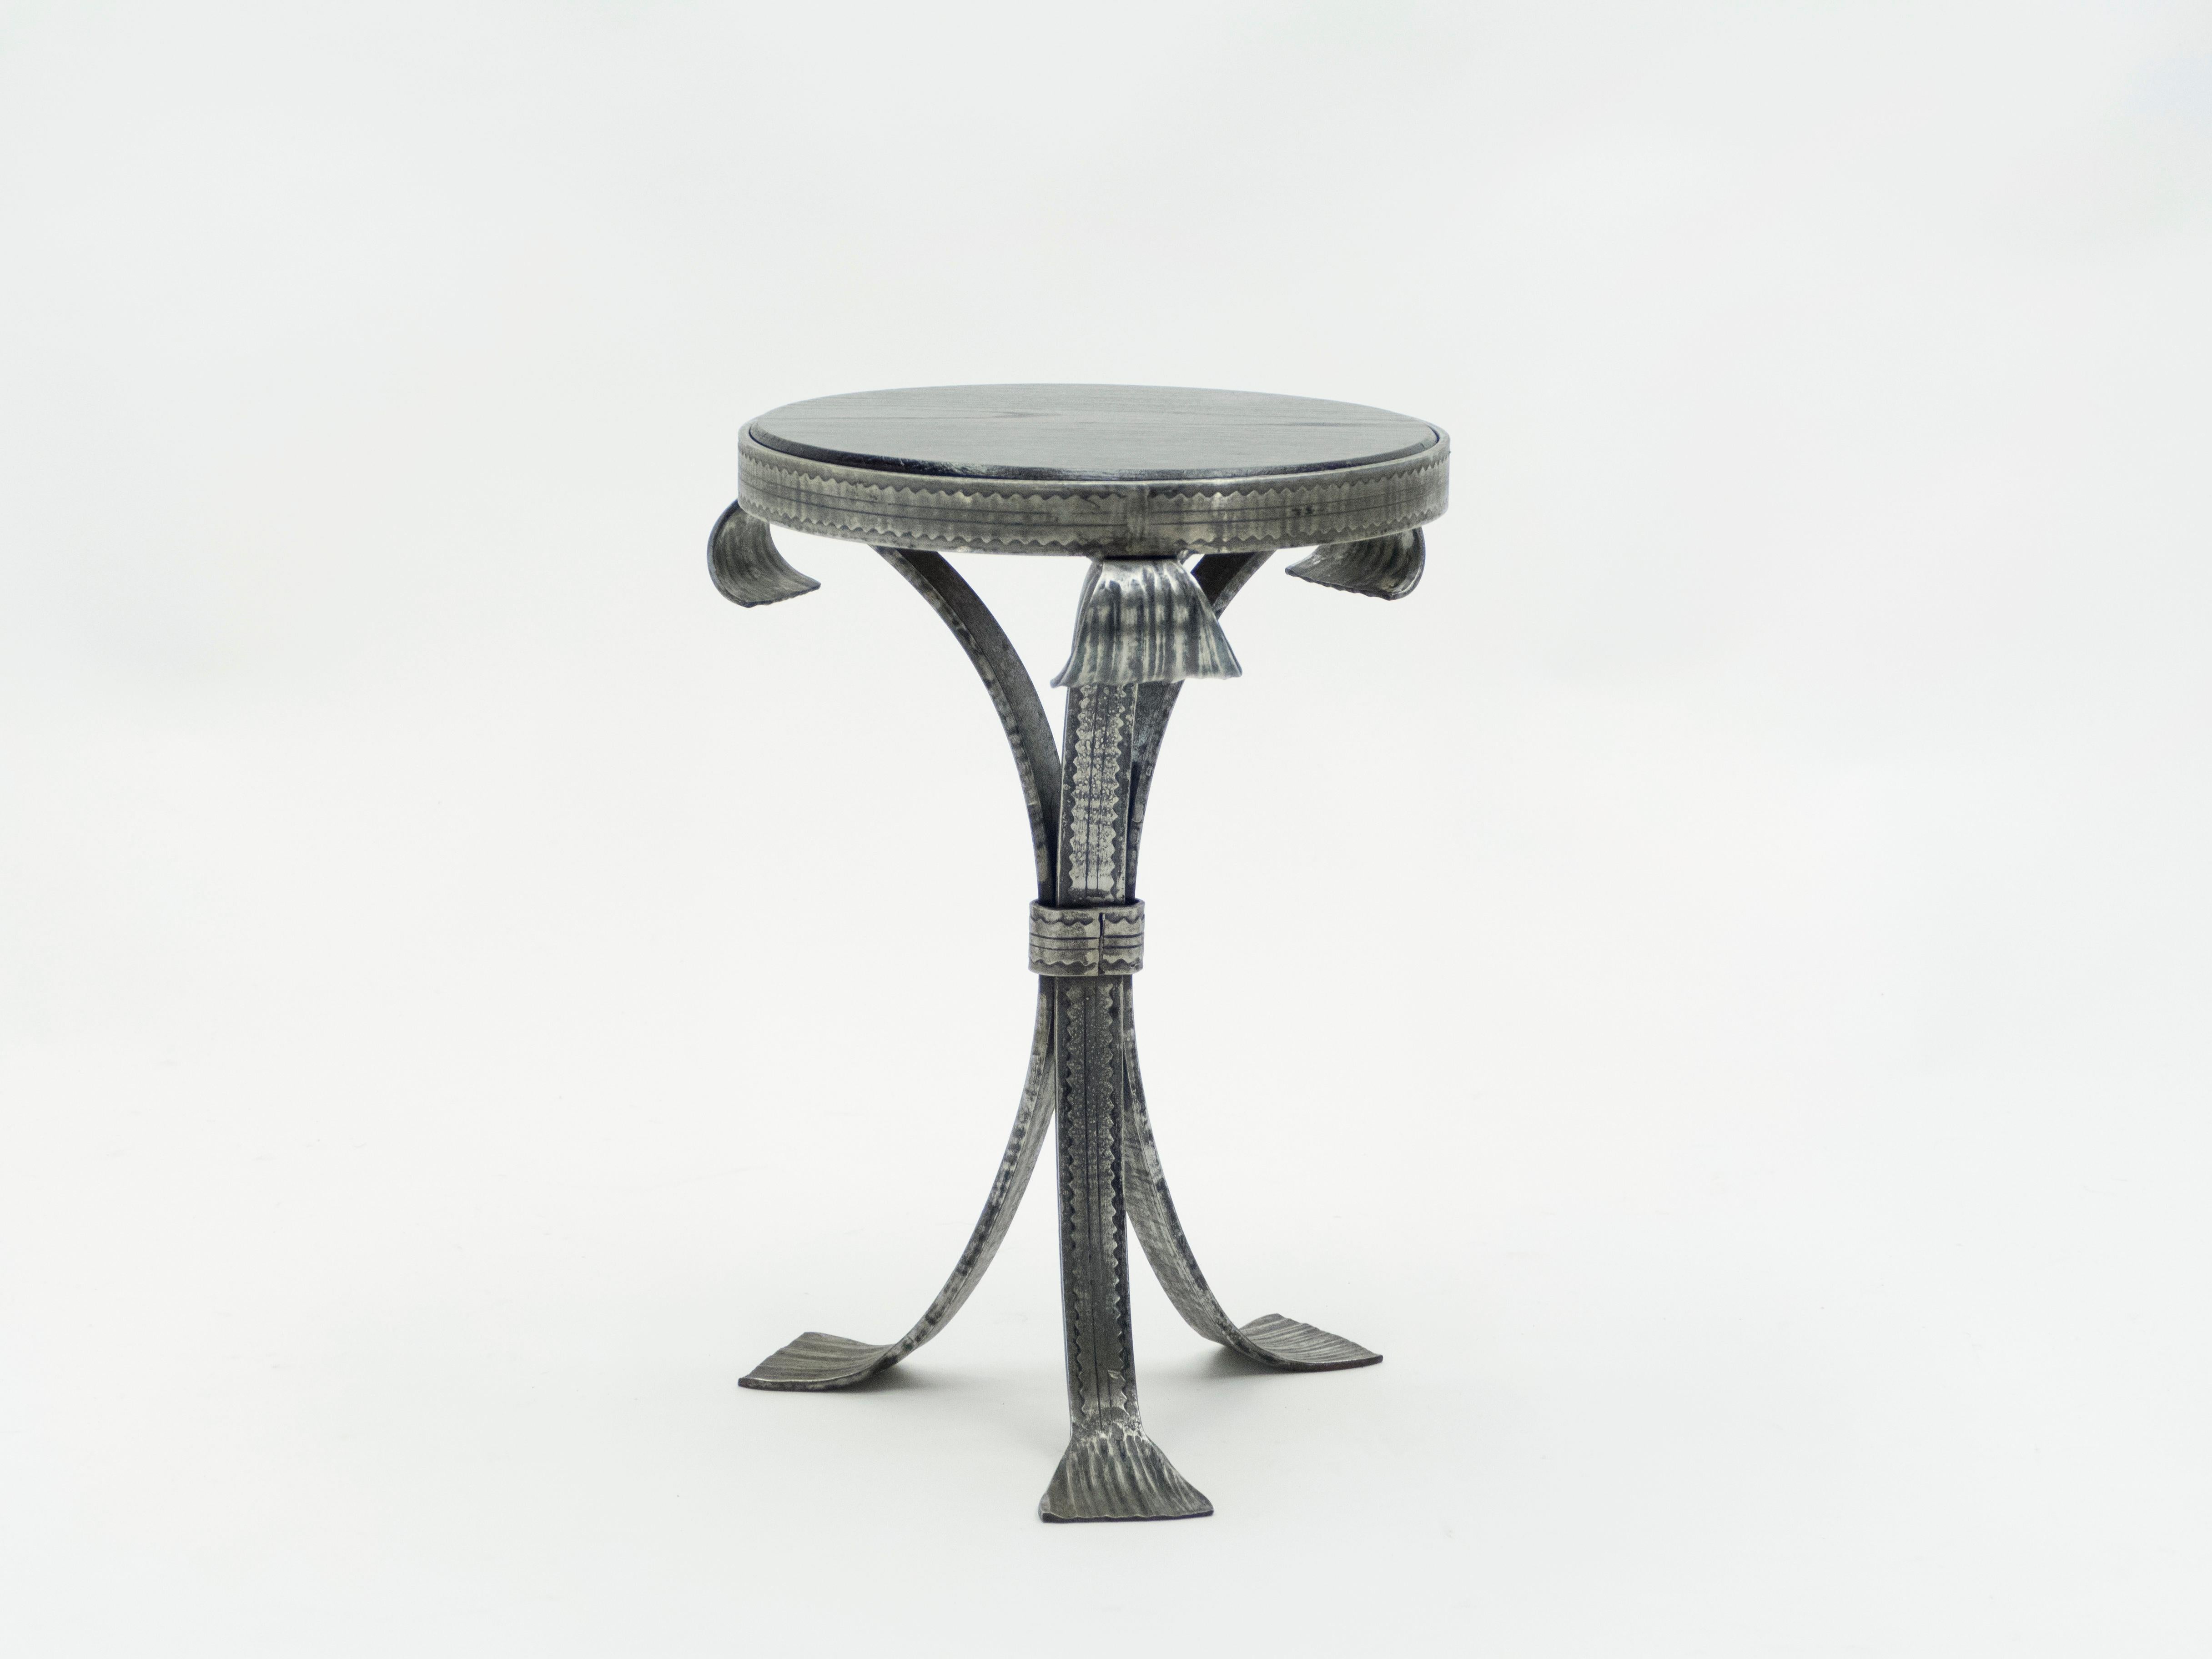 Hand produced in France in the early 1940s, this tripode gueridon features silky wrought steel legs with a beautiful rounded oak top. A perfect piece to use as an occasional table, end table, candle Stand, drinks table or smokers table. It looks